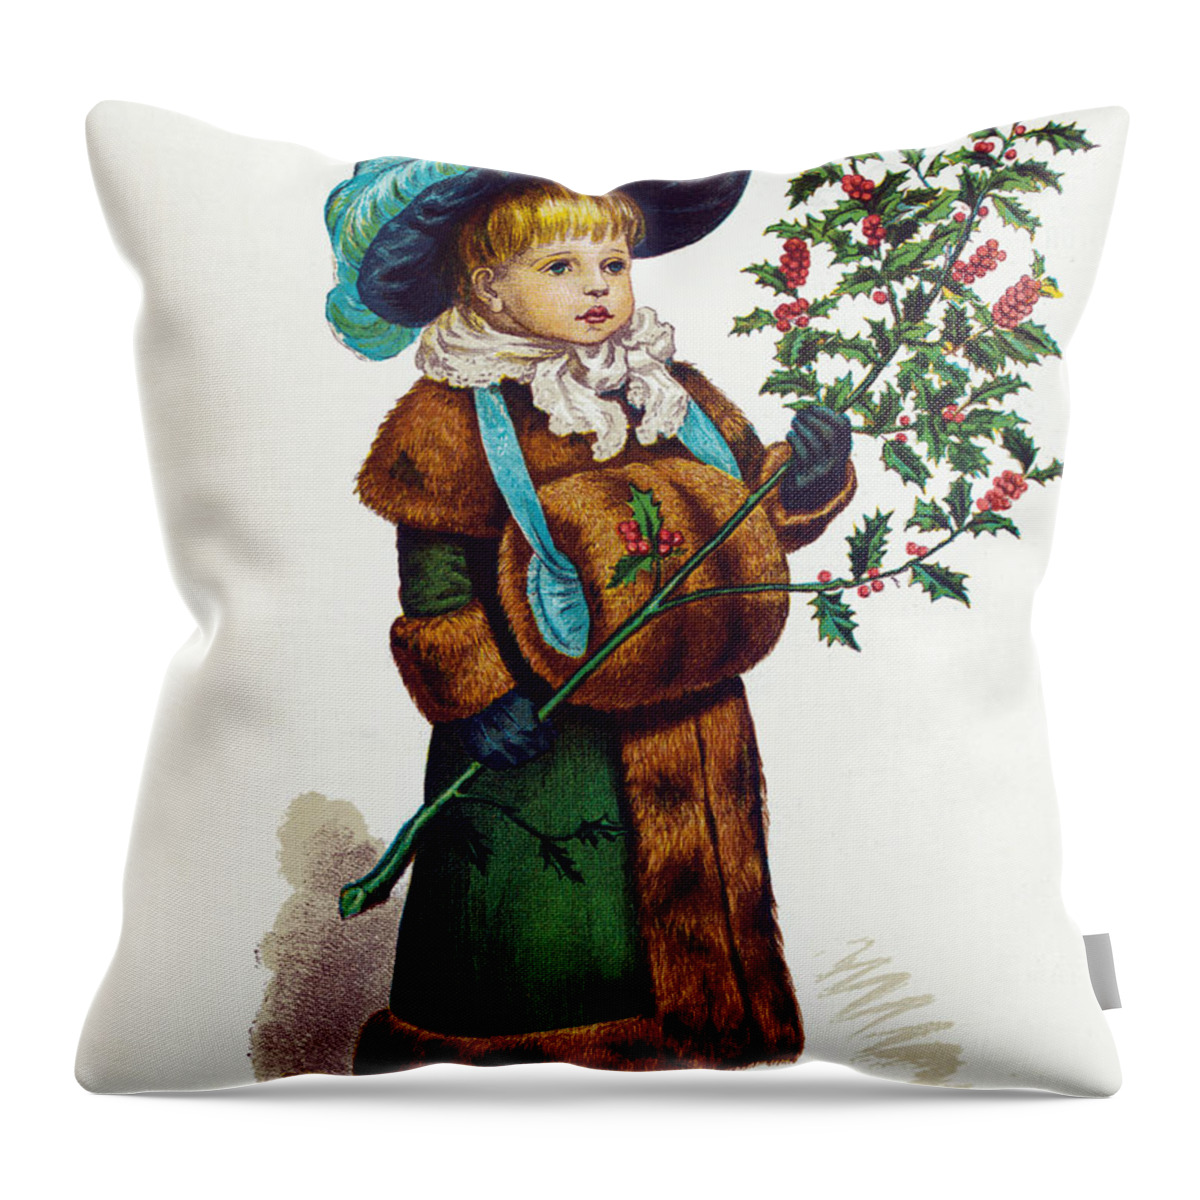 Girl Throw Pillow featuring the photograph Girl With Holly by Mary Evans